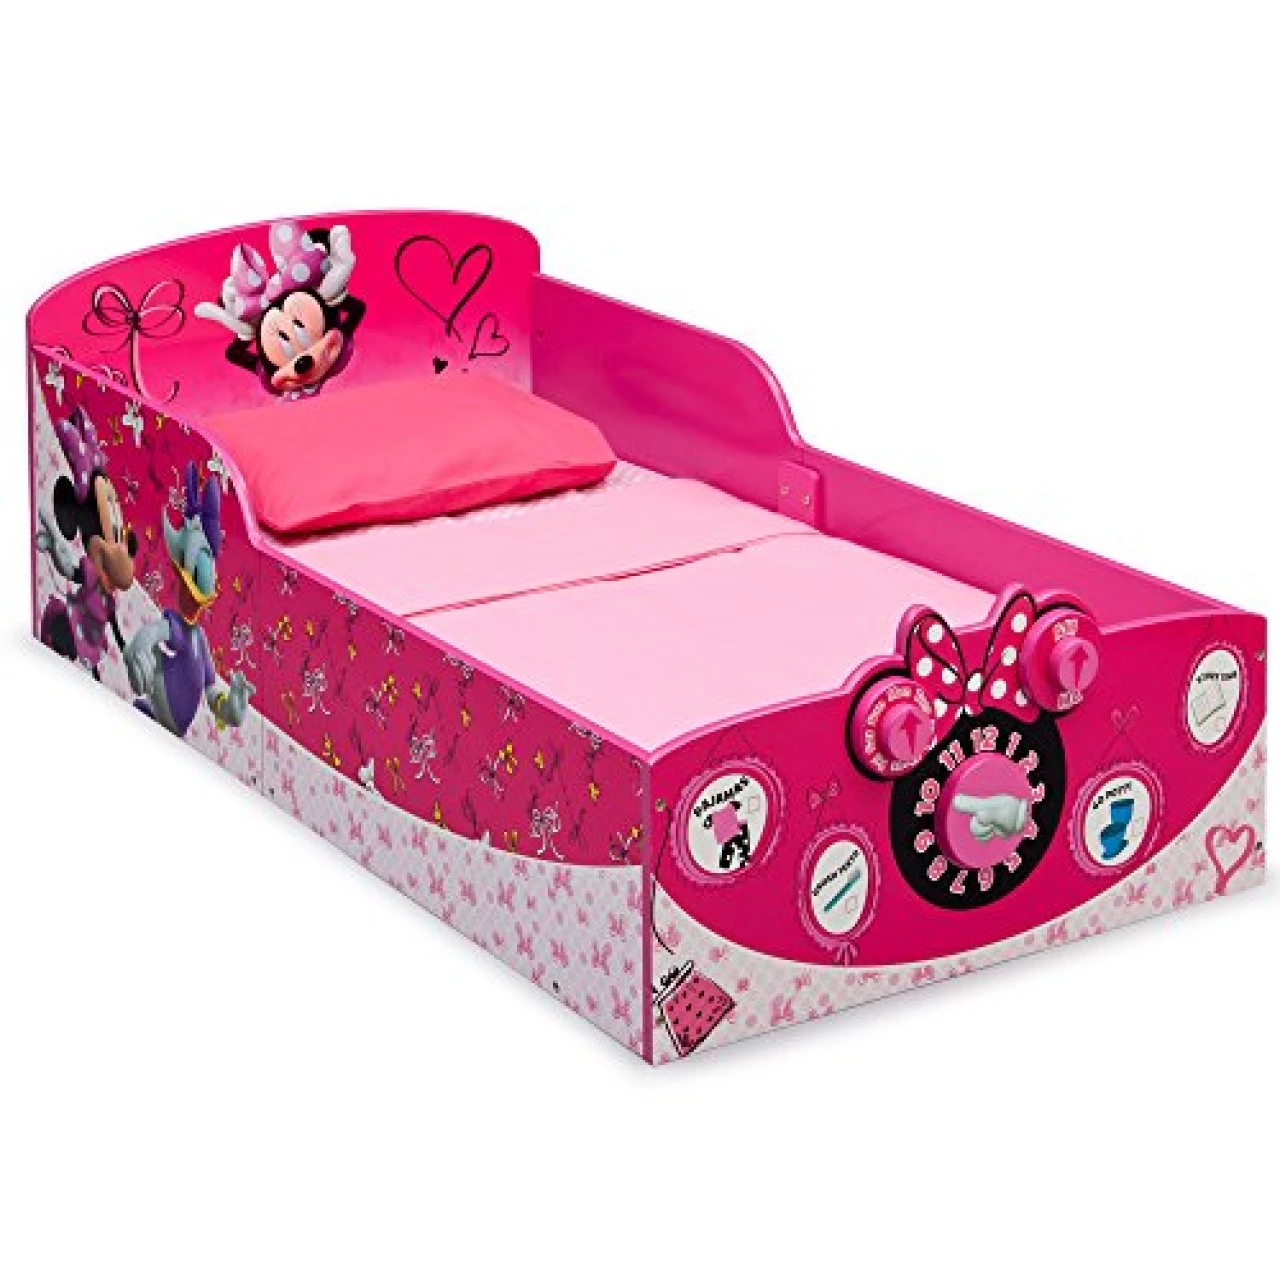 Delta Children Interactive Wood Toddler Bed - Greenguard Gold Certified, Disney Minnie Mouse